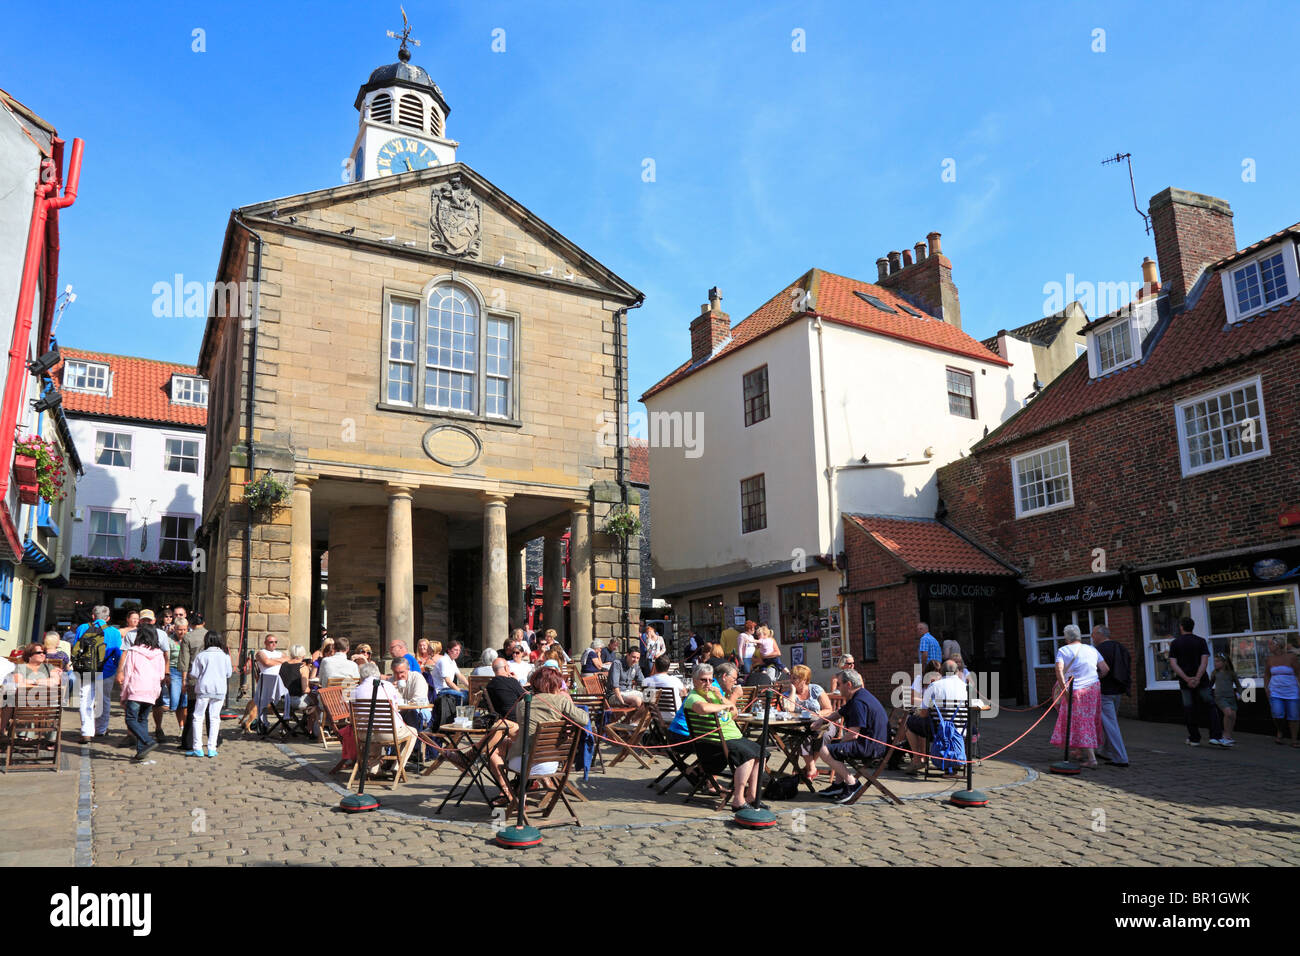 Outdoor cafe by the Old Town Hall Market Place Whitby North Yorkshire